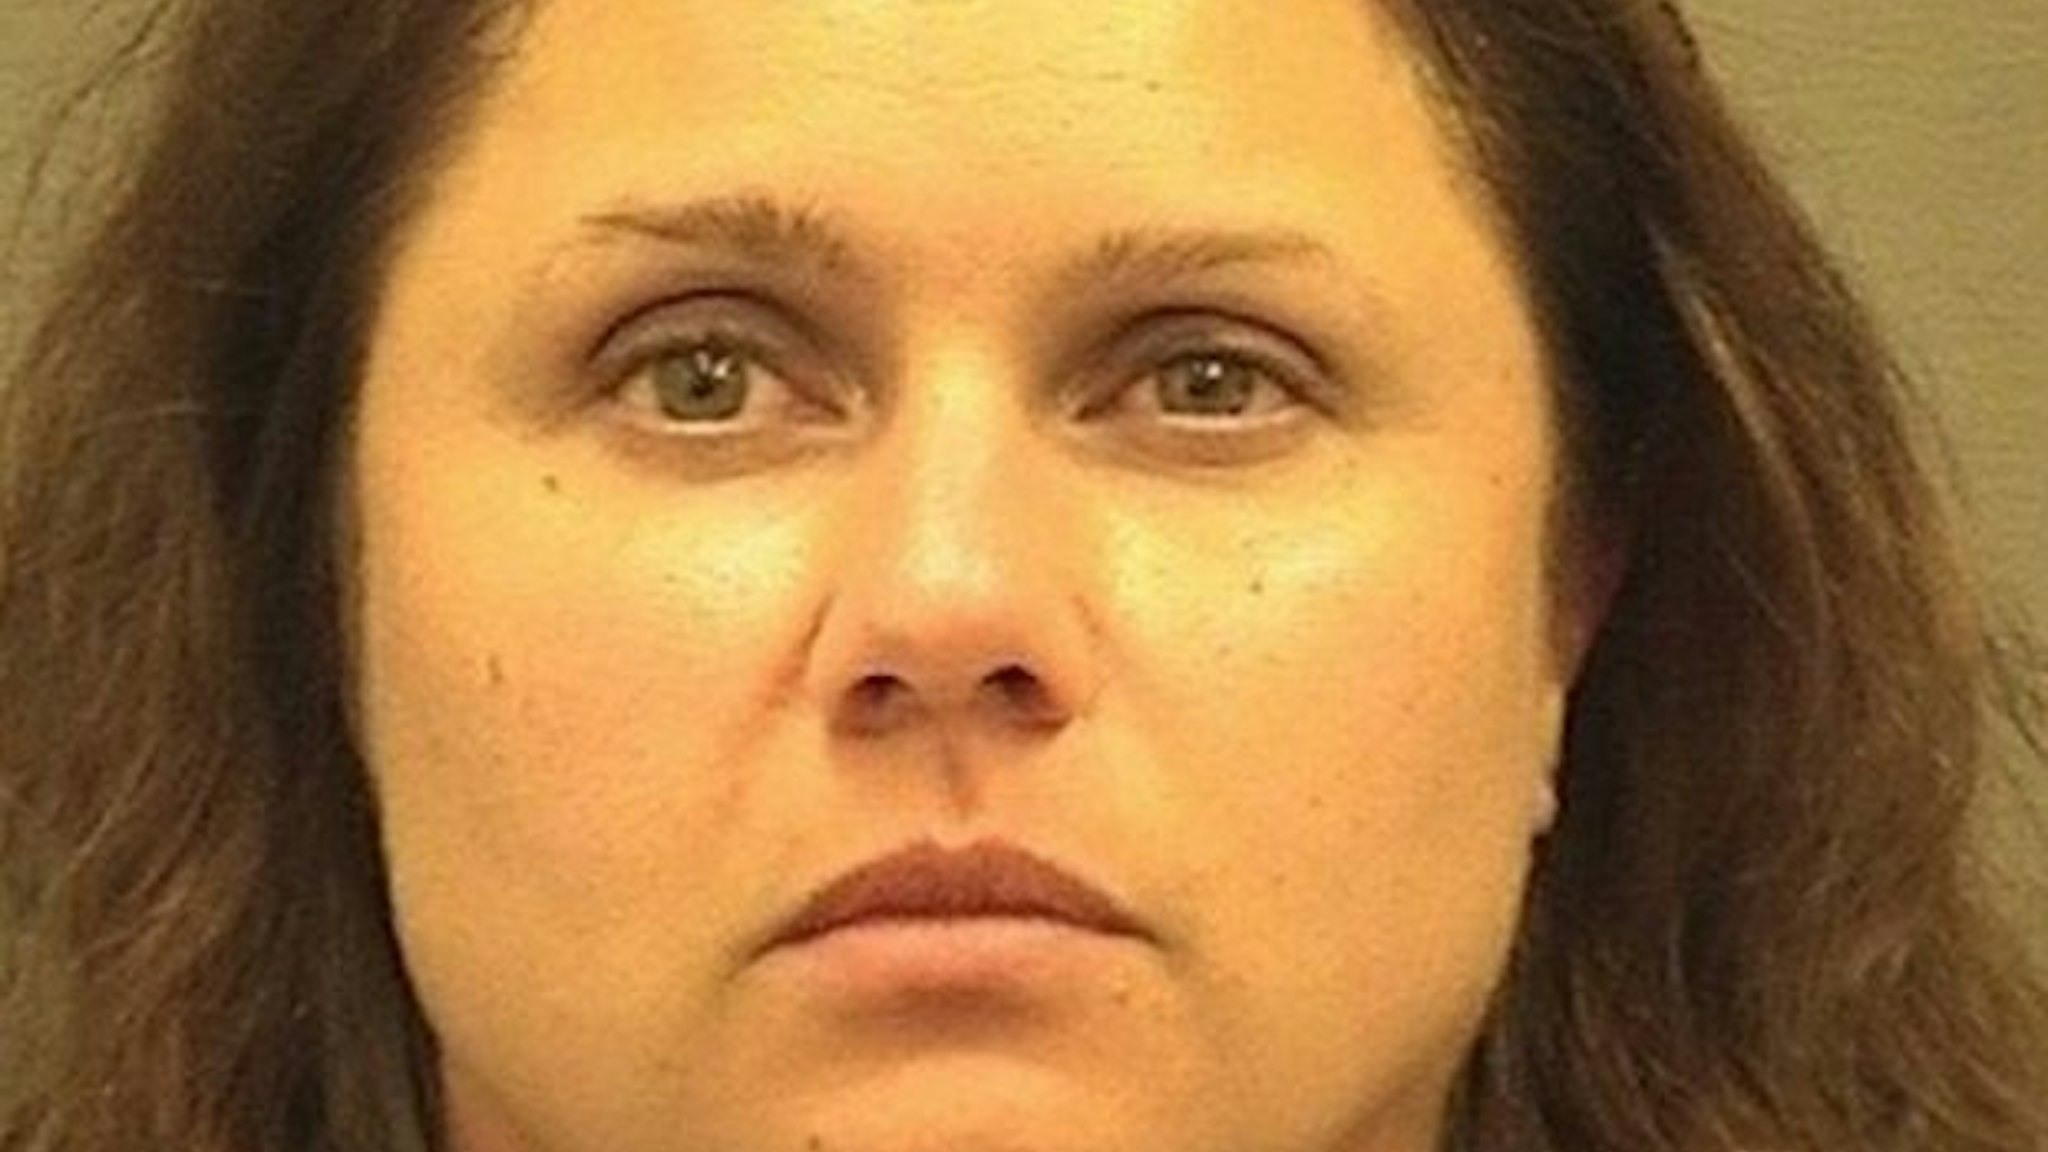 Natalie Edwards, 41, pleaded guilty to a conspiracy charge for leaking financial banking records of Trump associates